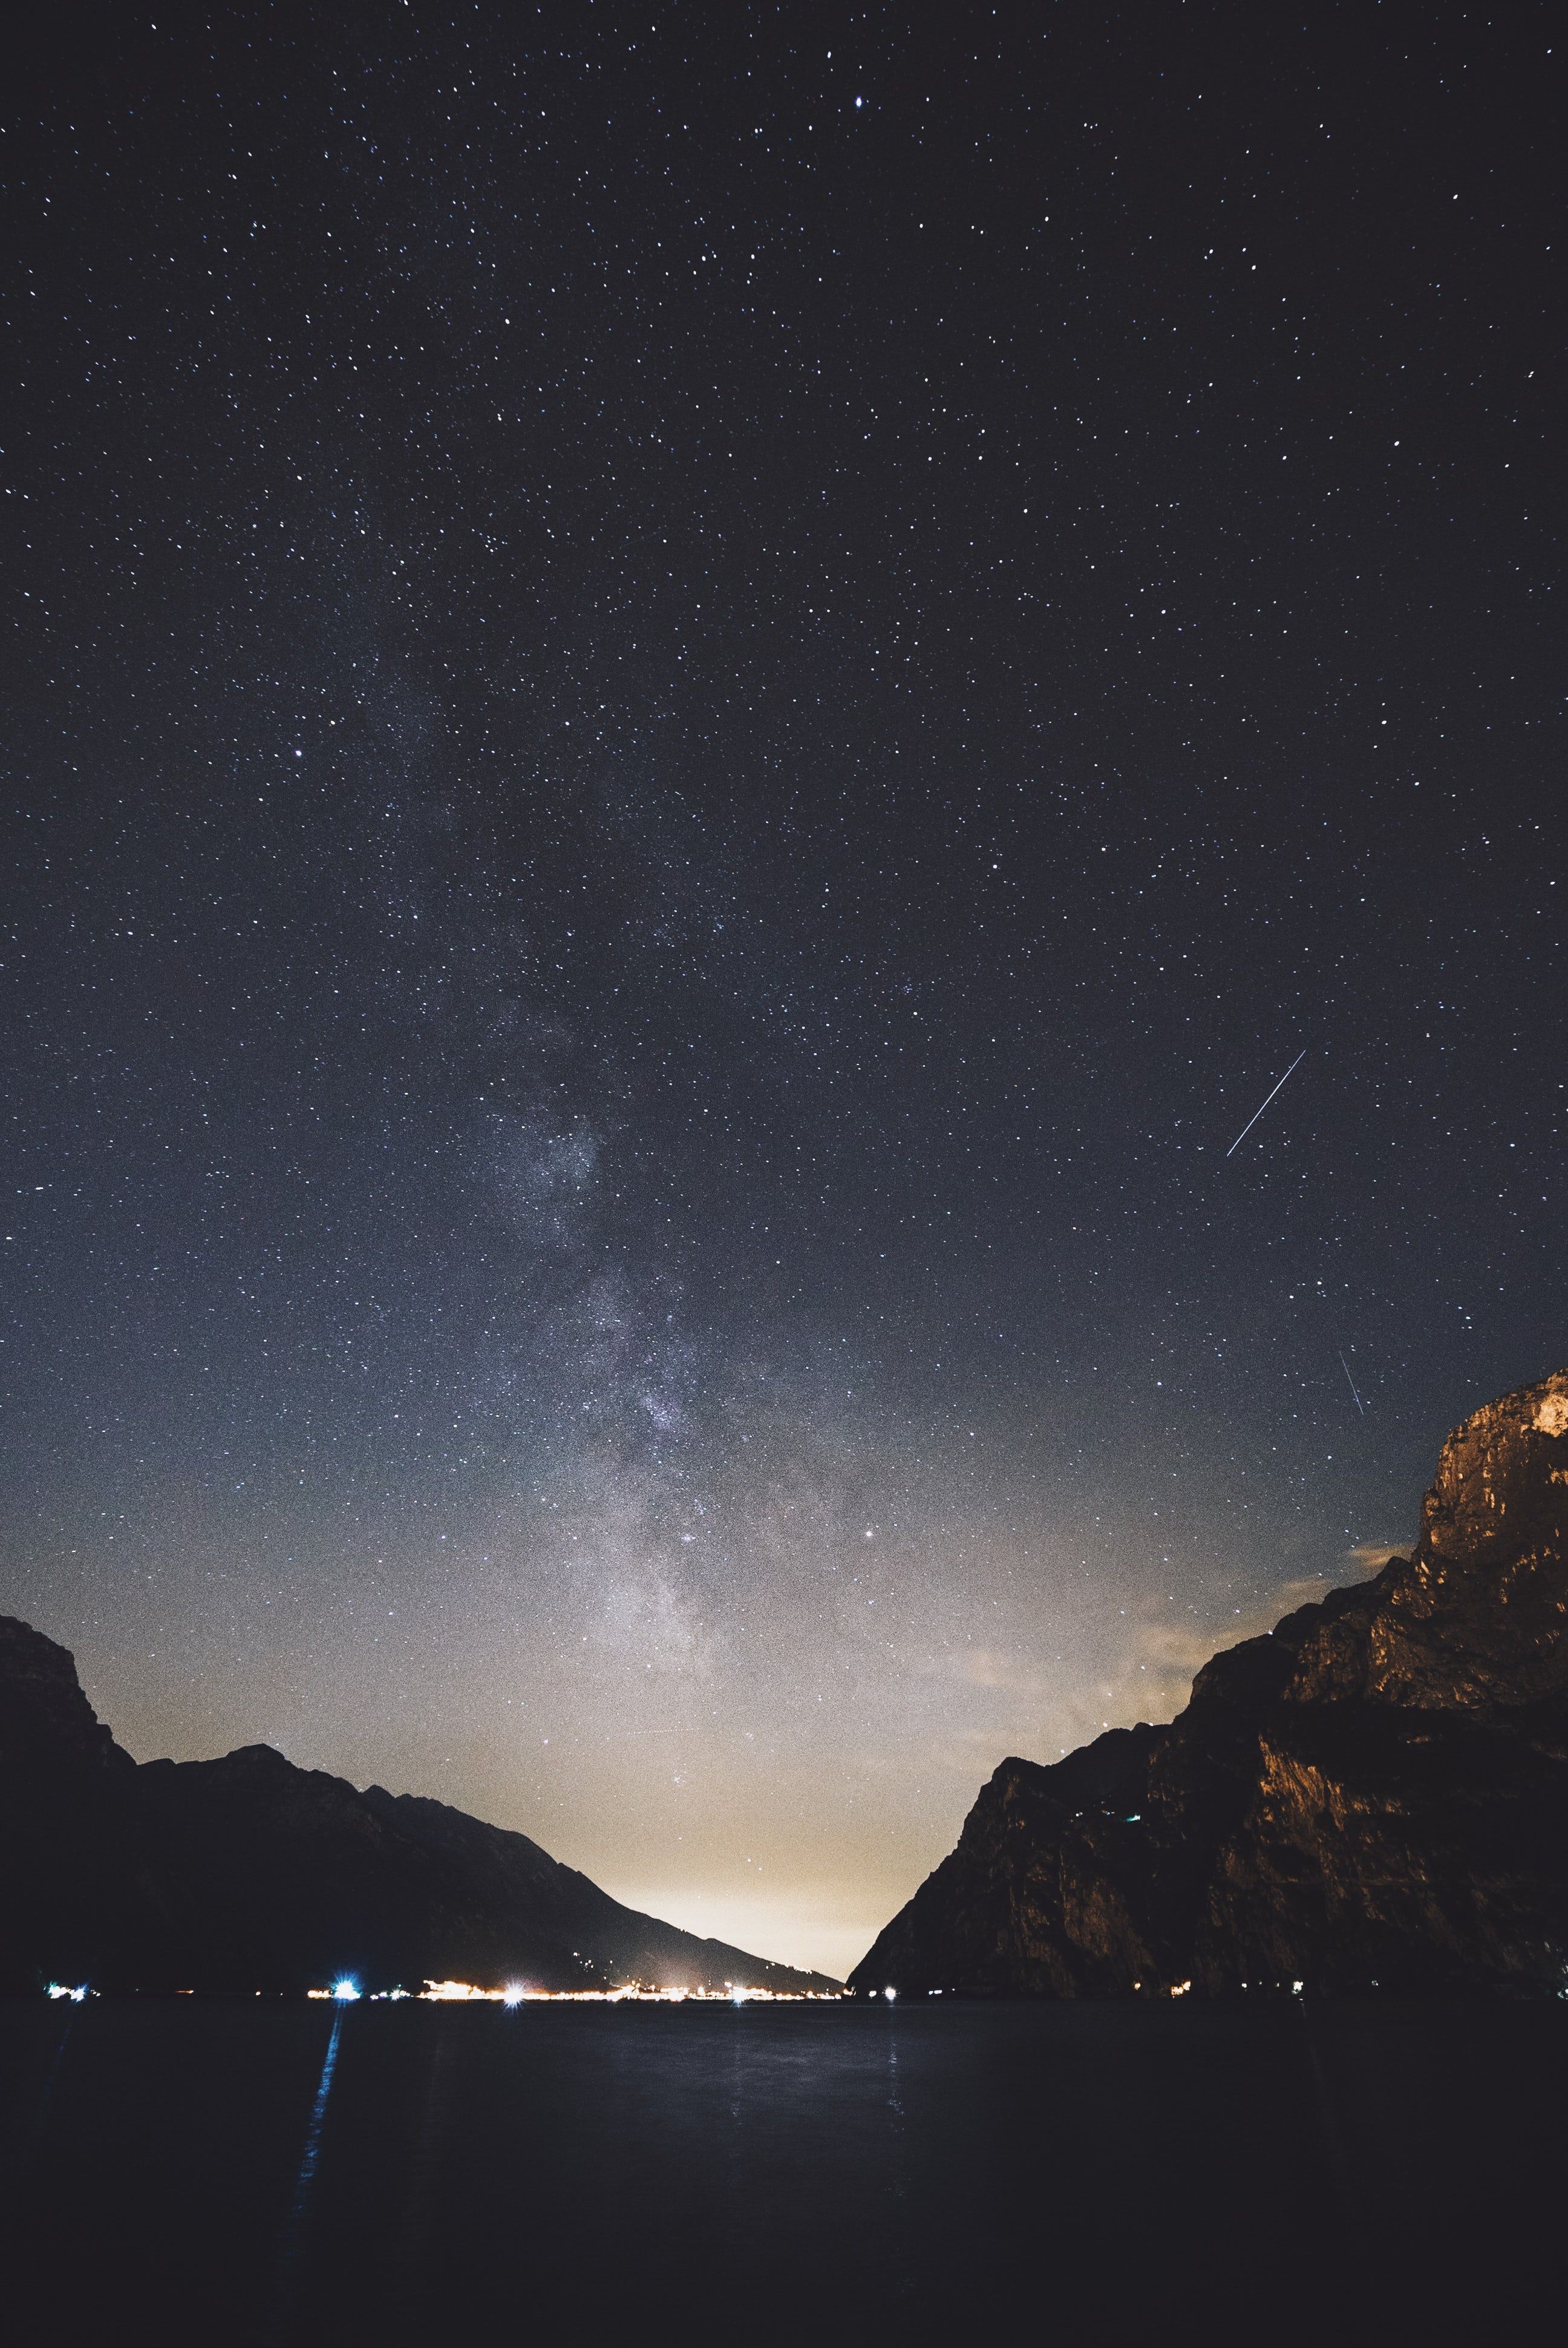 The milky way and a shooting star over the lake and mountain at